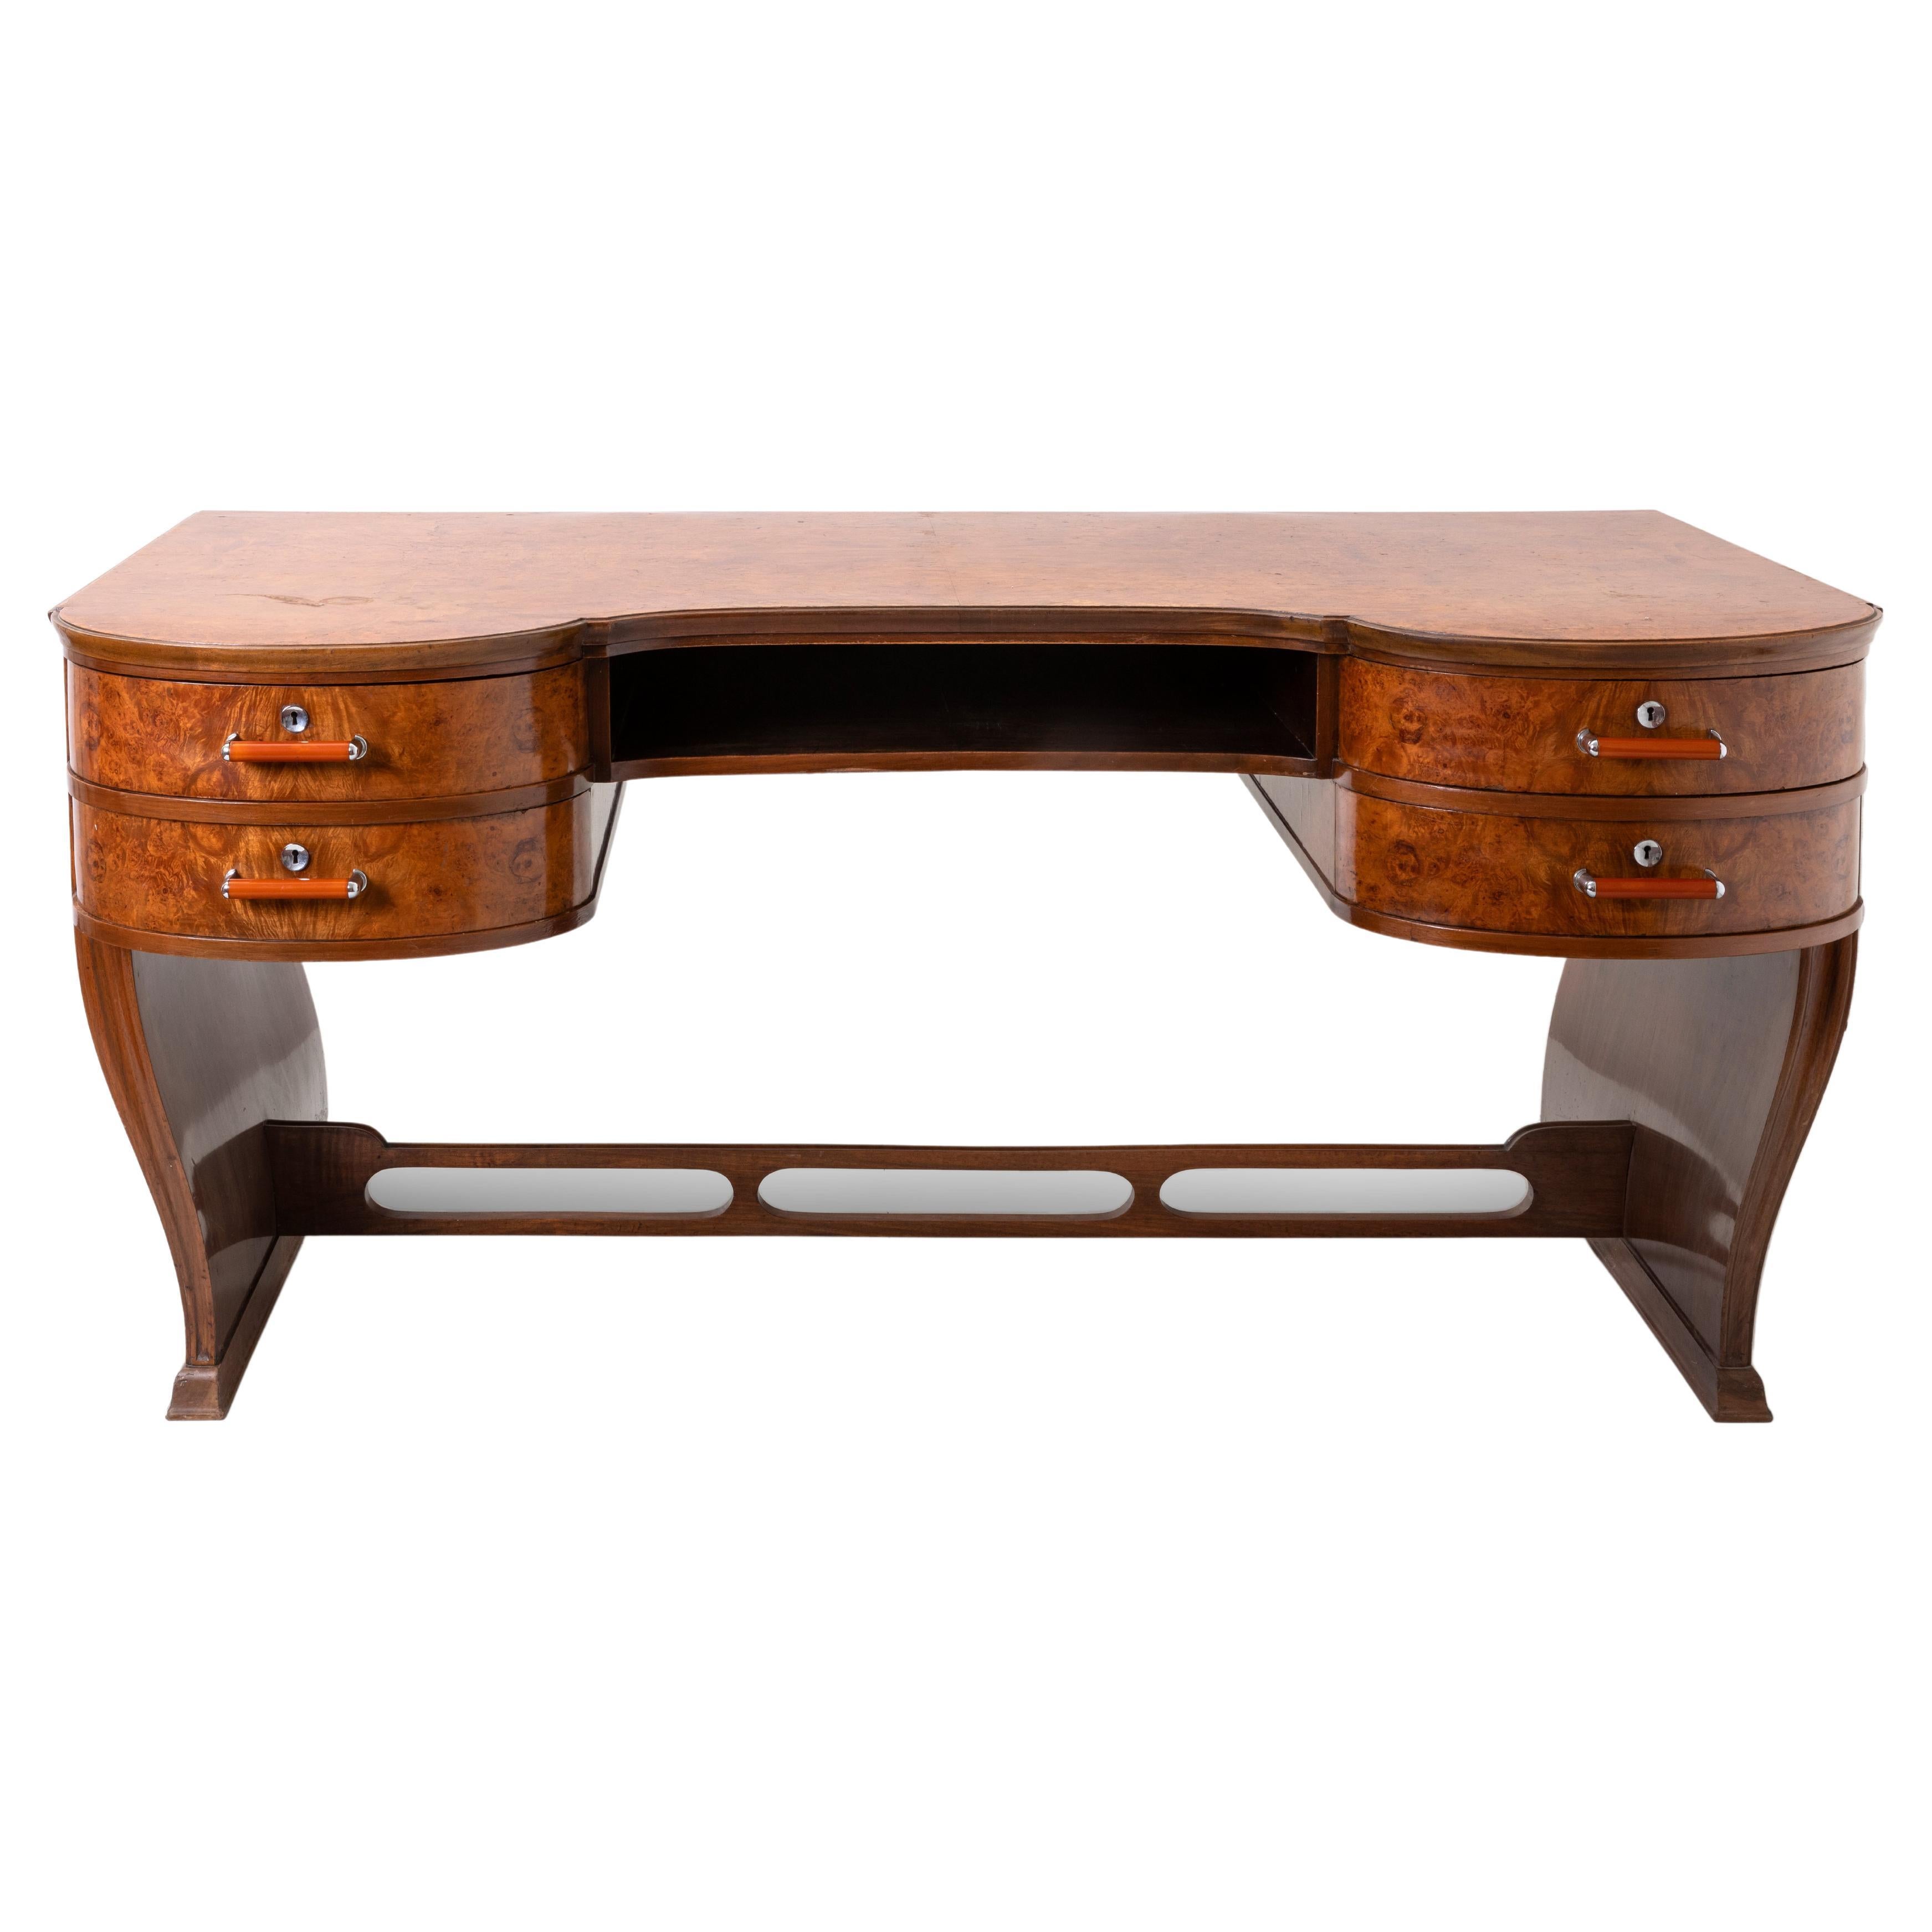 Prod. Italy, c. 1930 Deco desk with curvilinear forms  For Sale